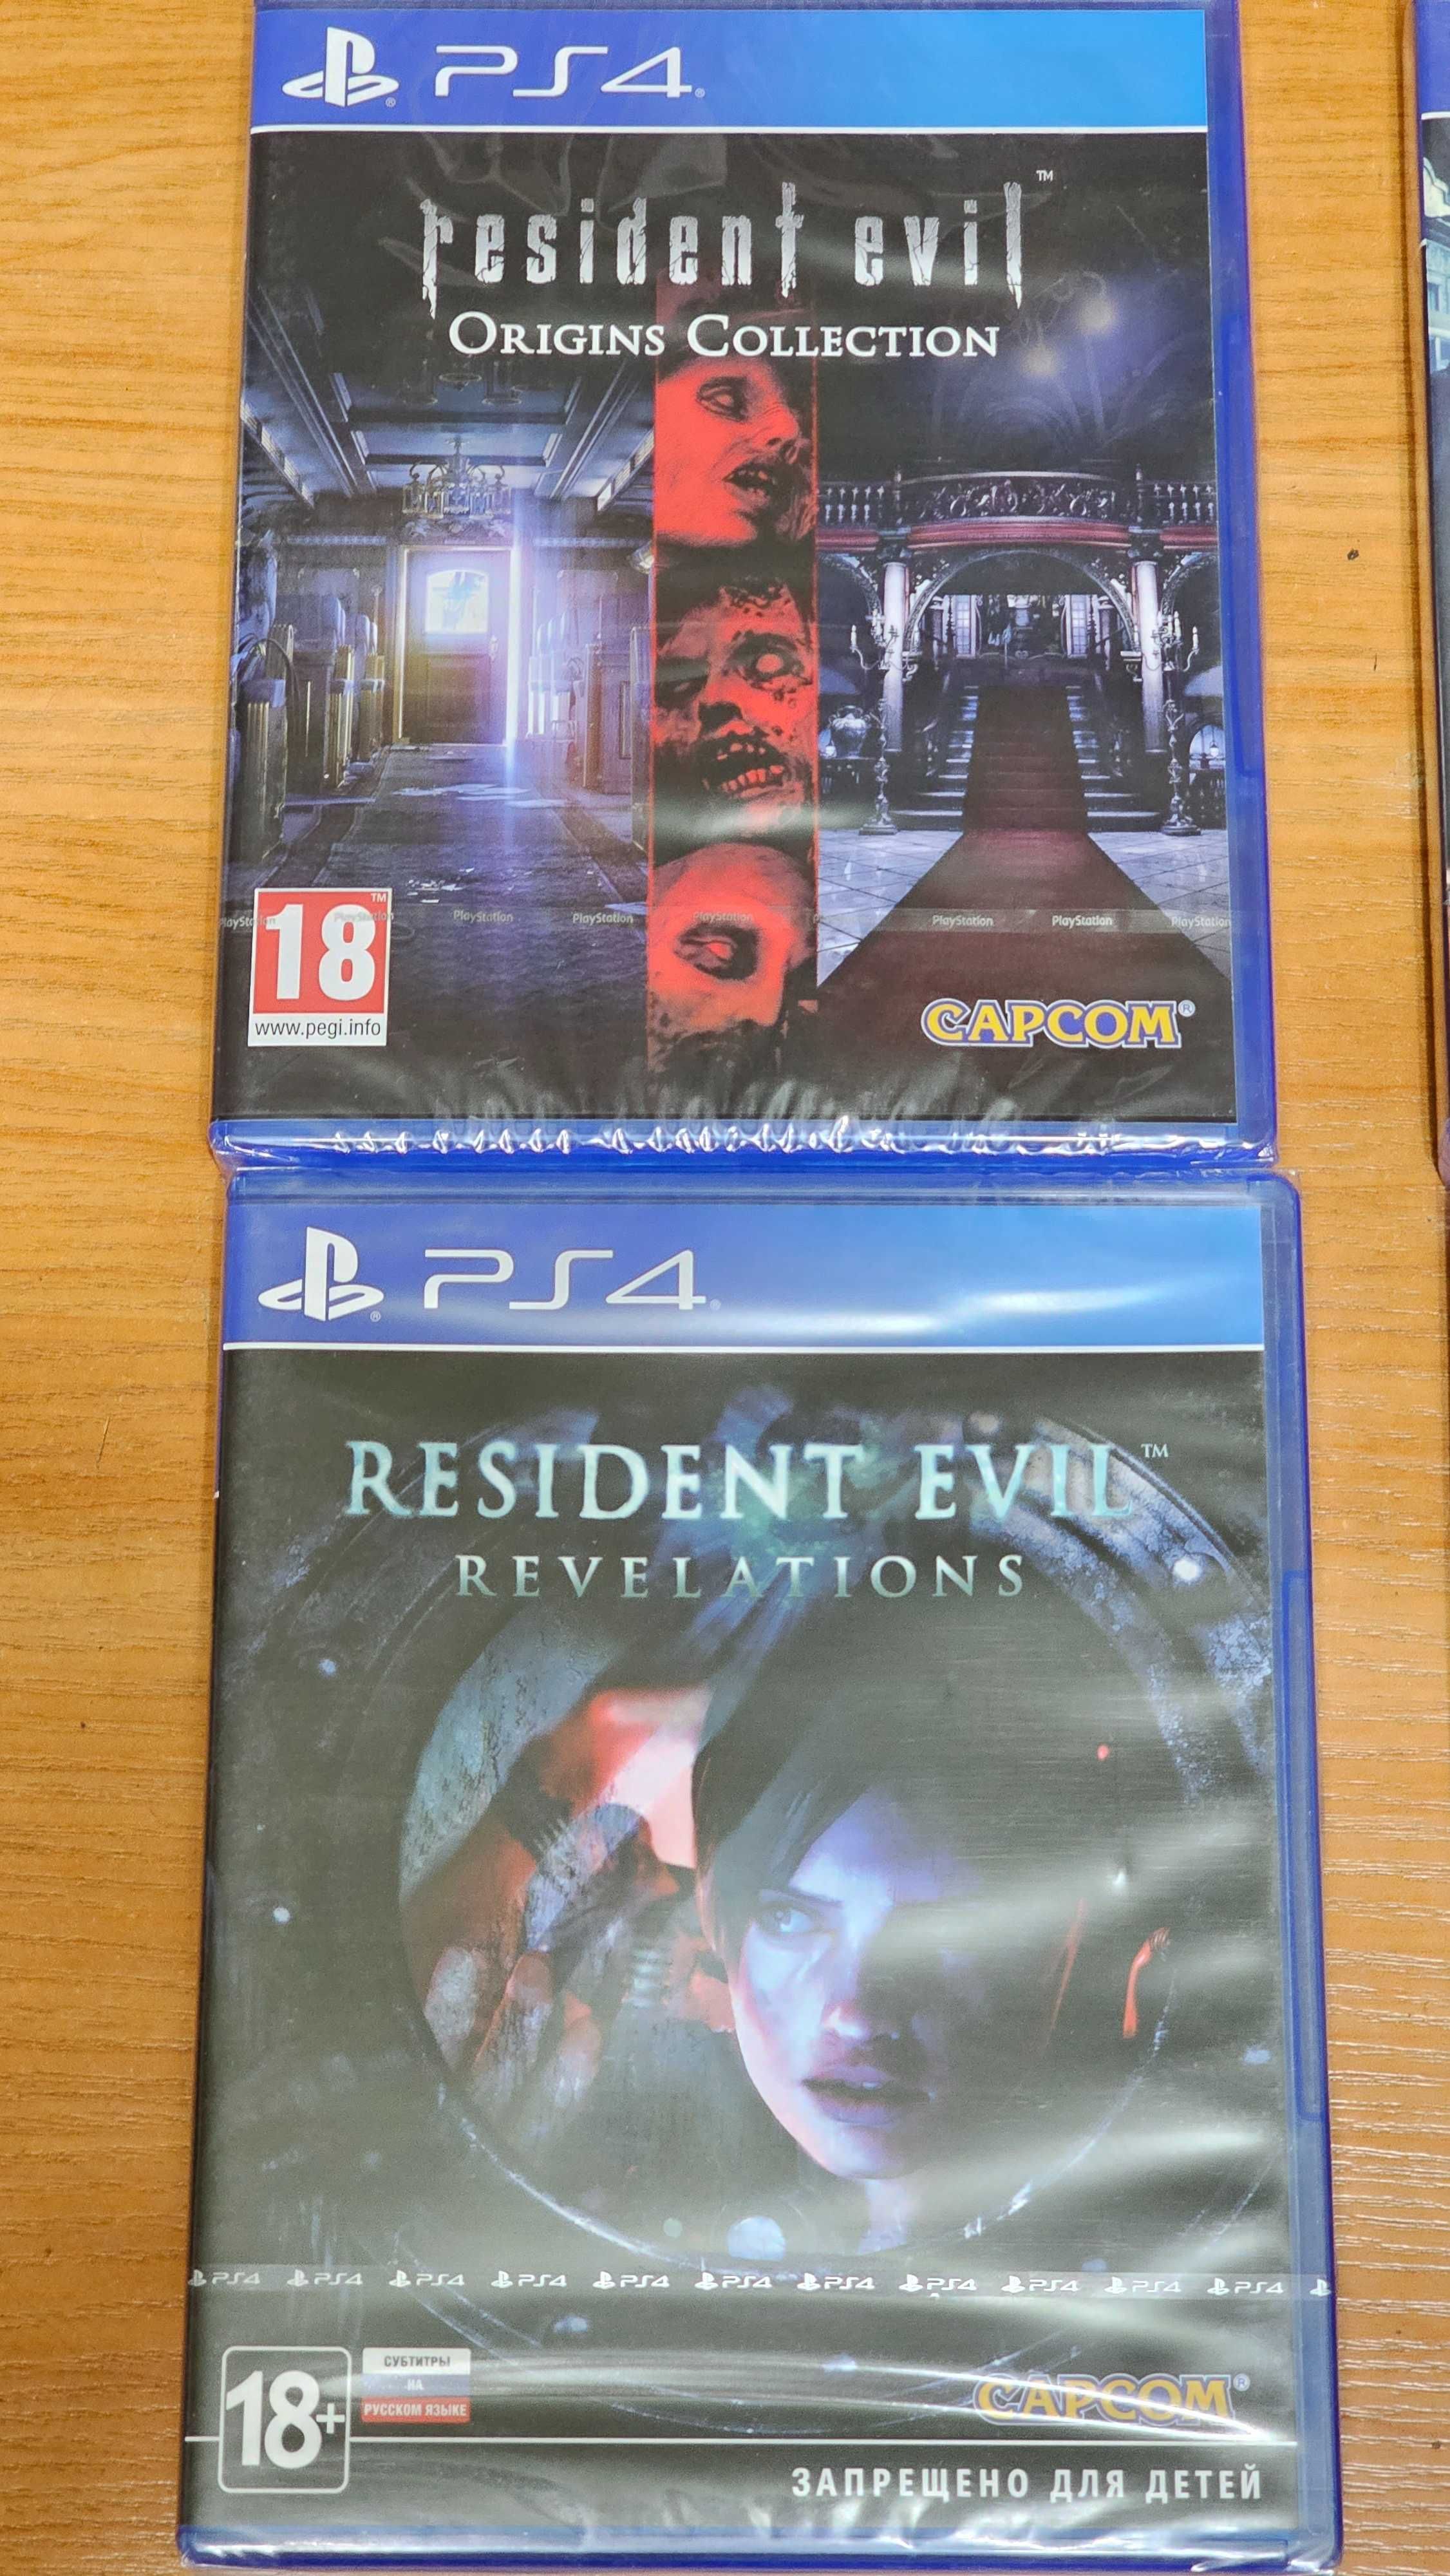 ДИСКИ PlayStaion 4 PS4 Resident Evil 2,3,4,4HD,5,6,7, 8Village Origins